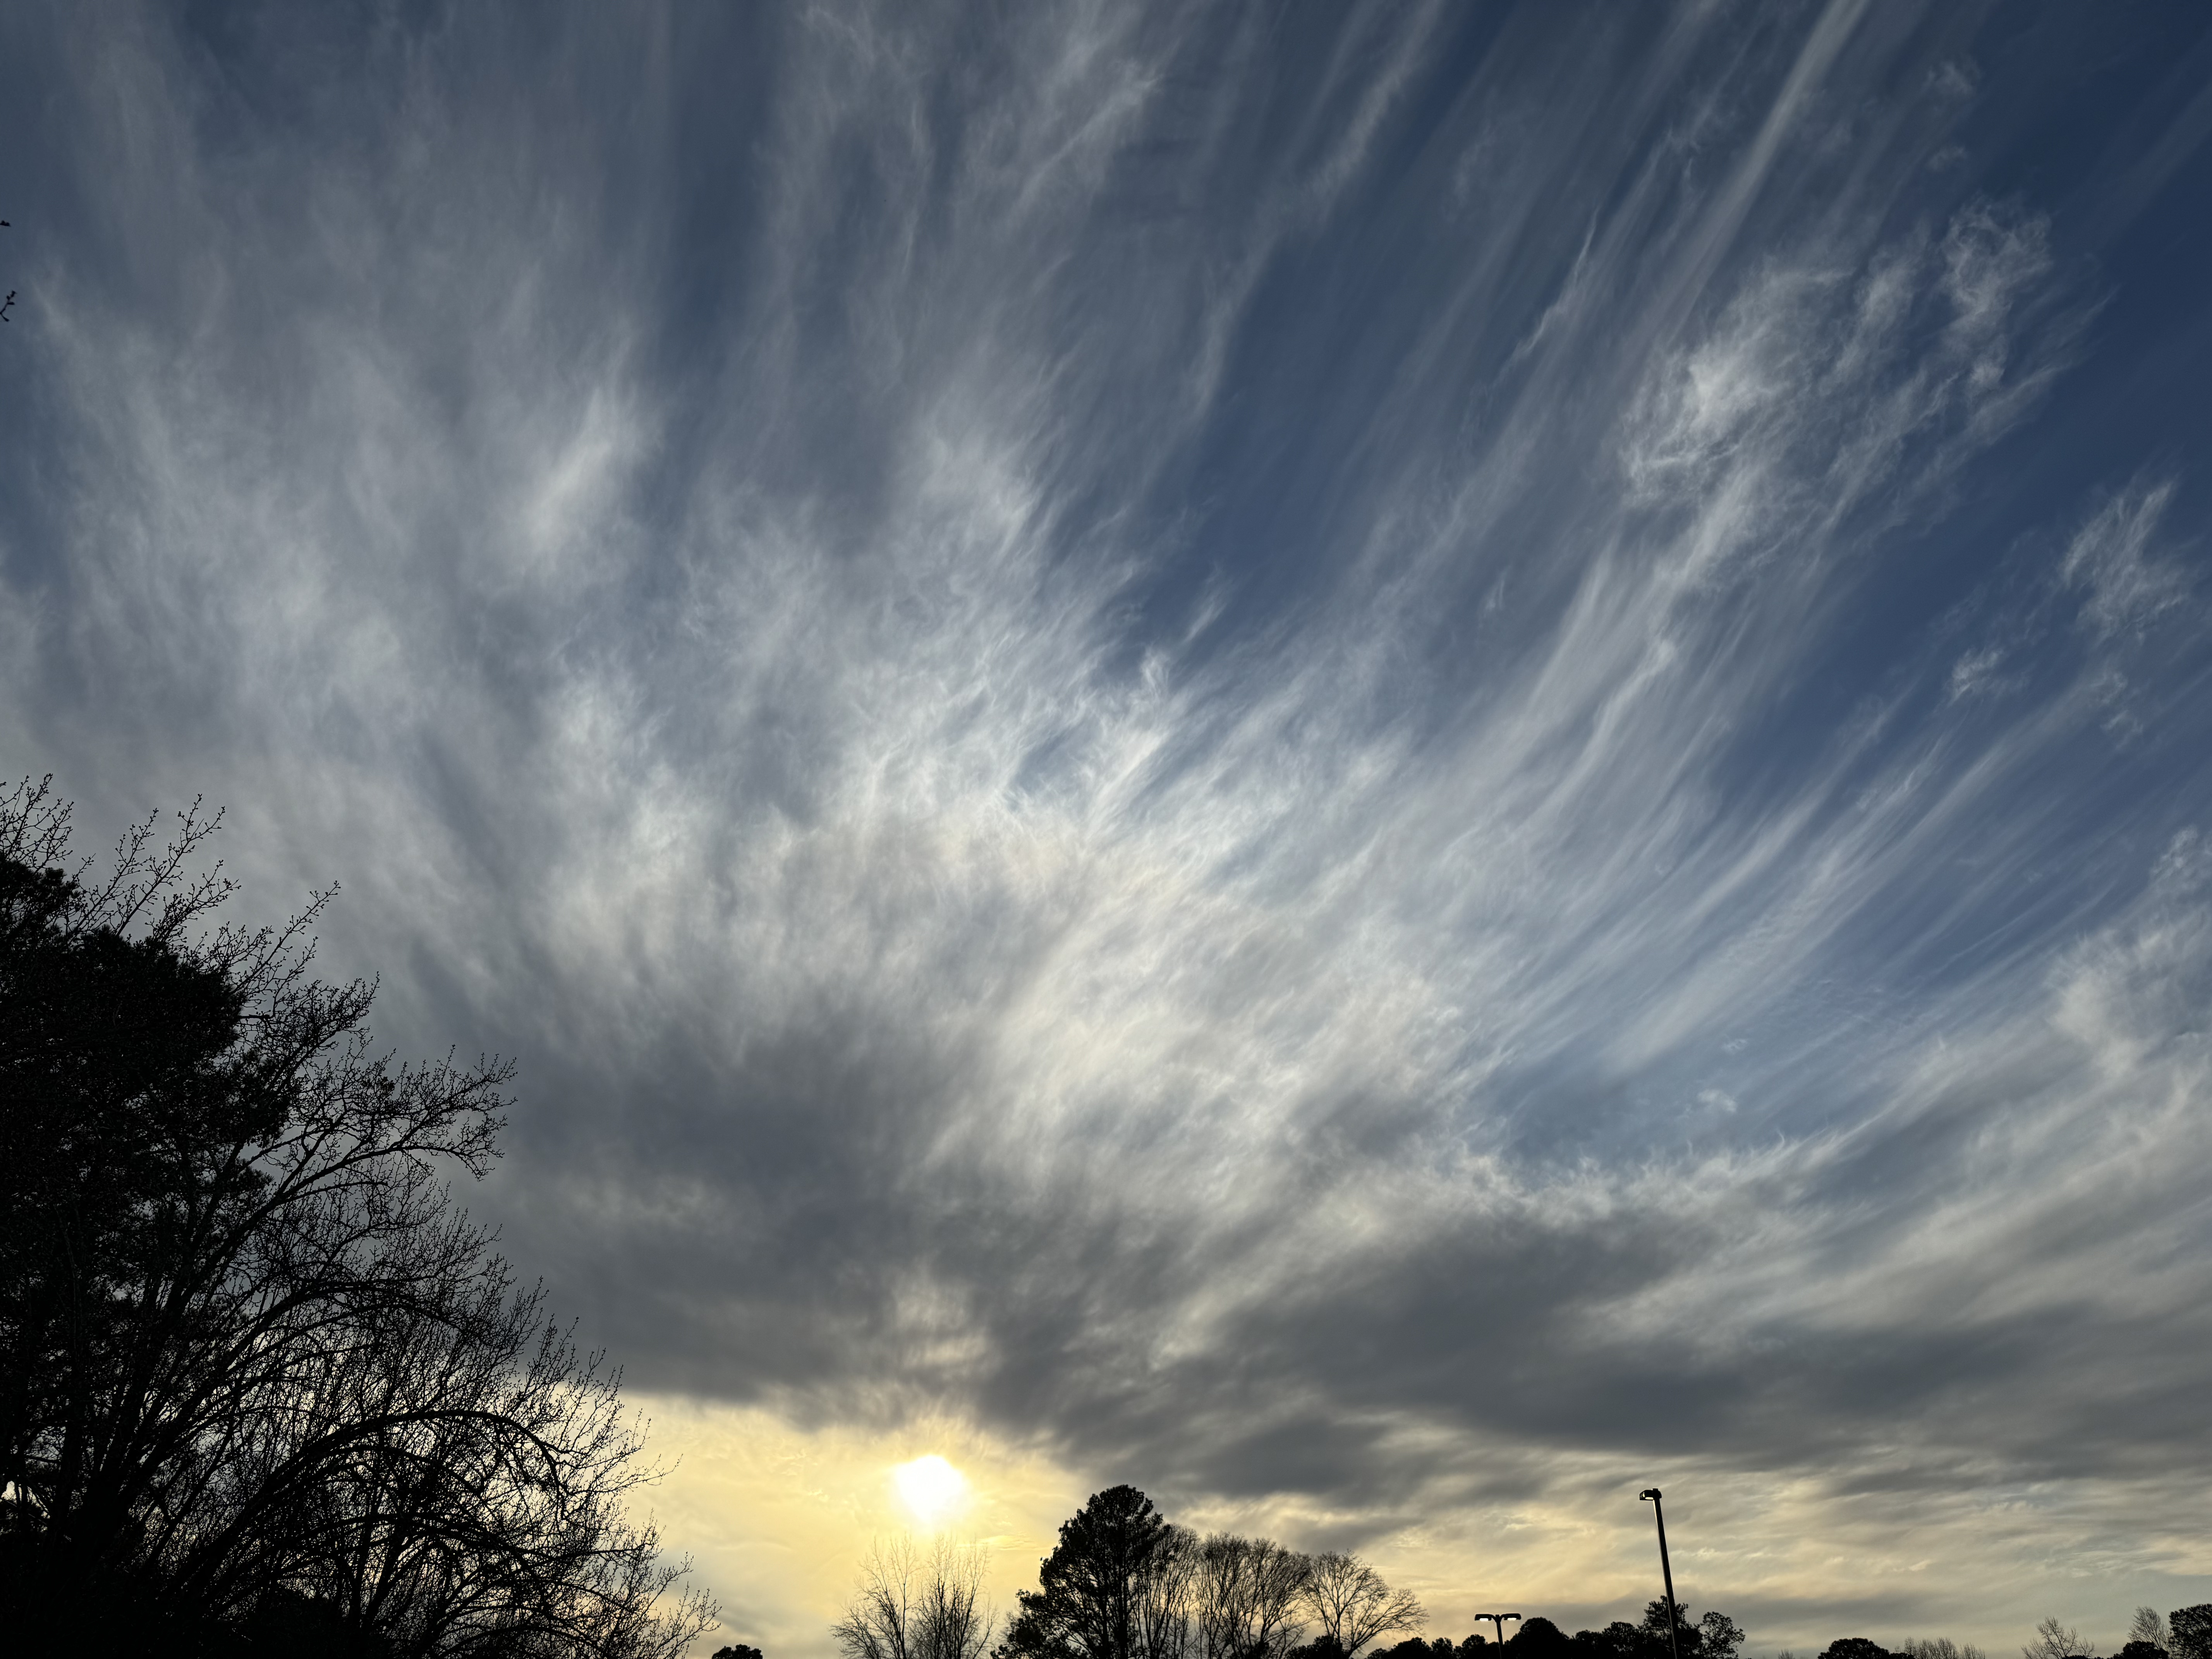 Landscape photo of stringy cirrus clouds near sunset.